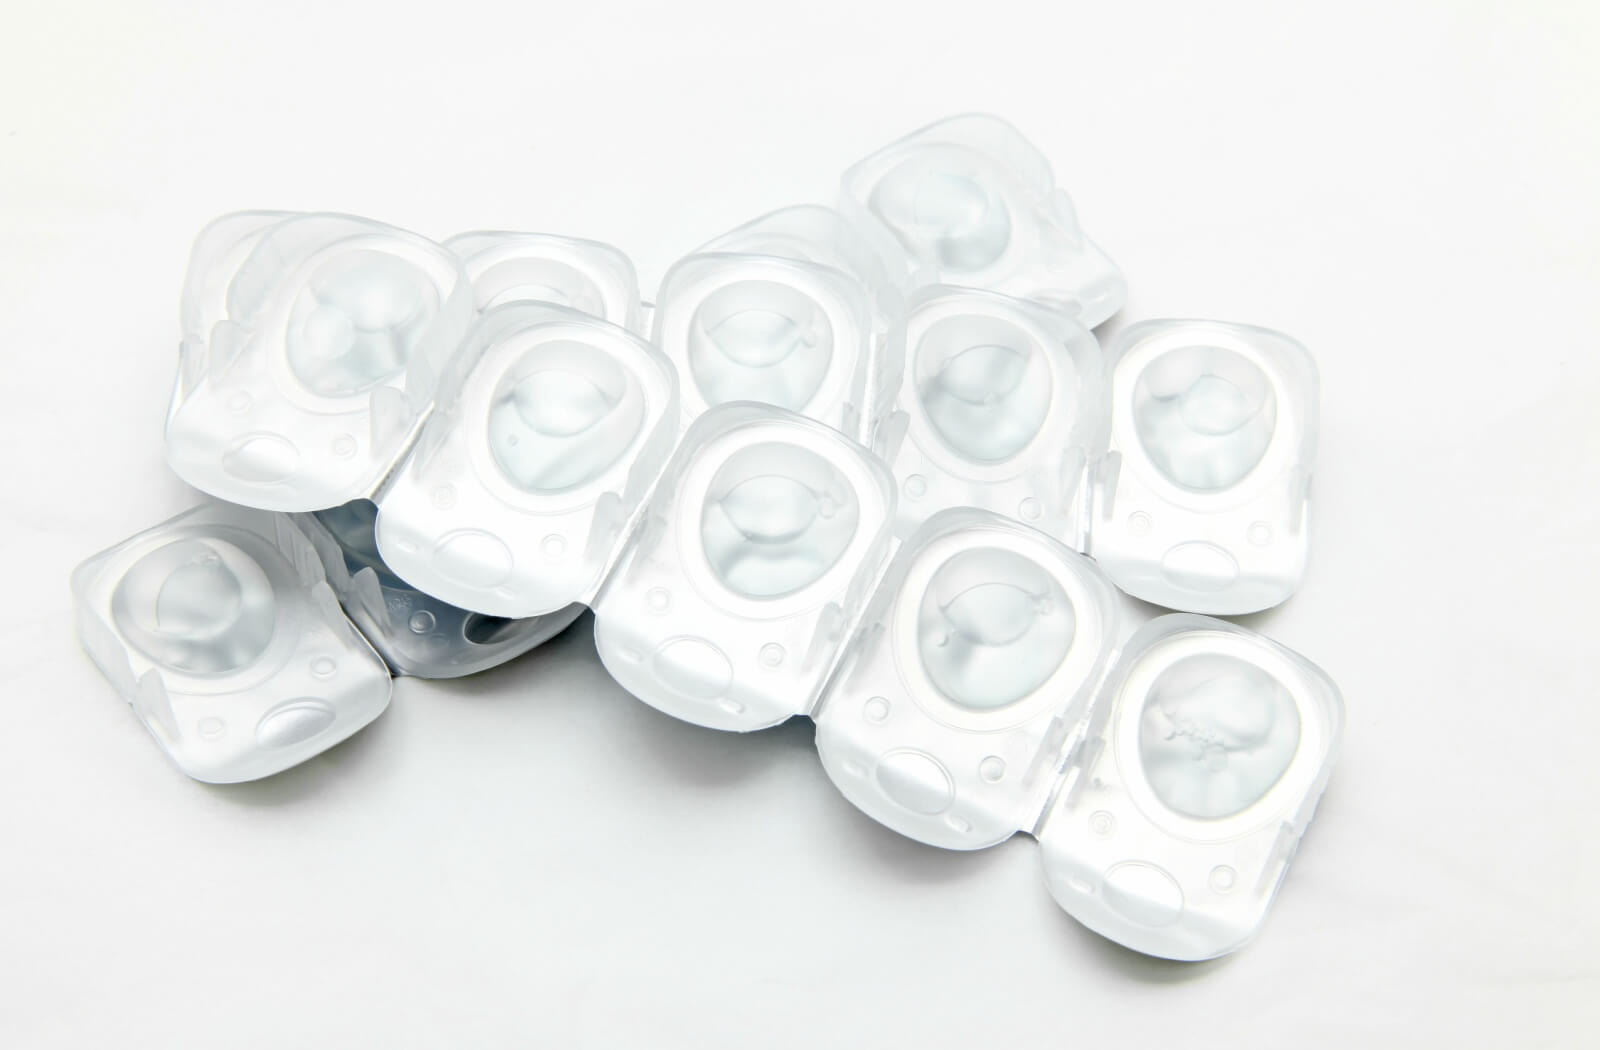 A stack of sealed plastic containers of disposable contact lenses against a white backdrop.